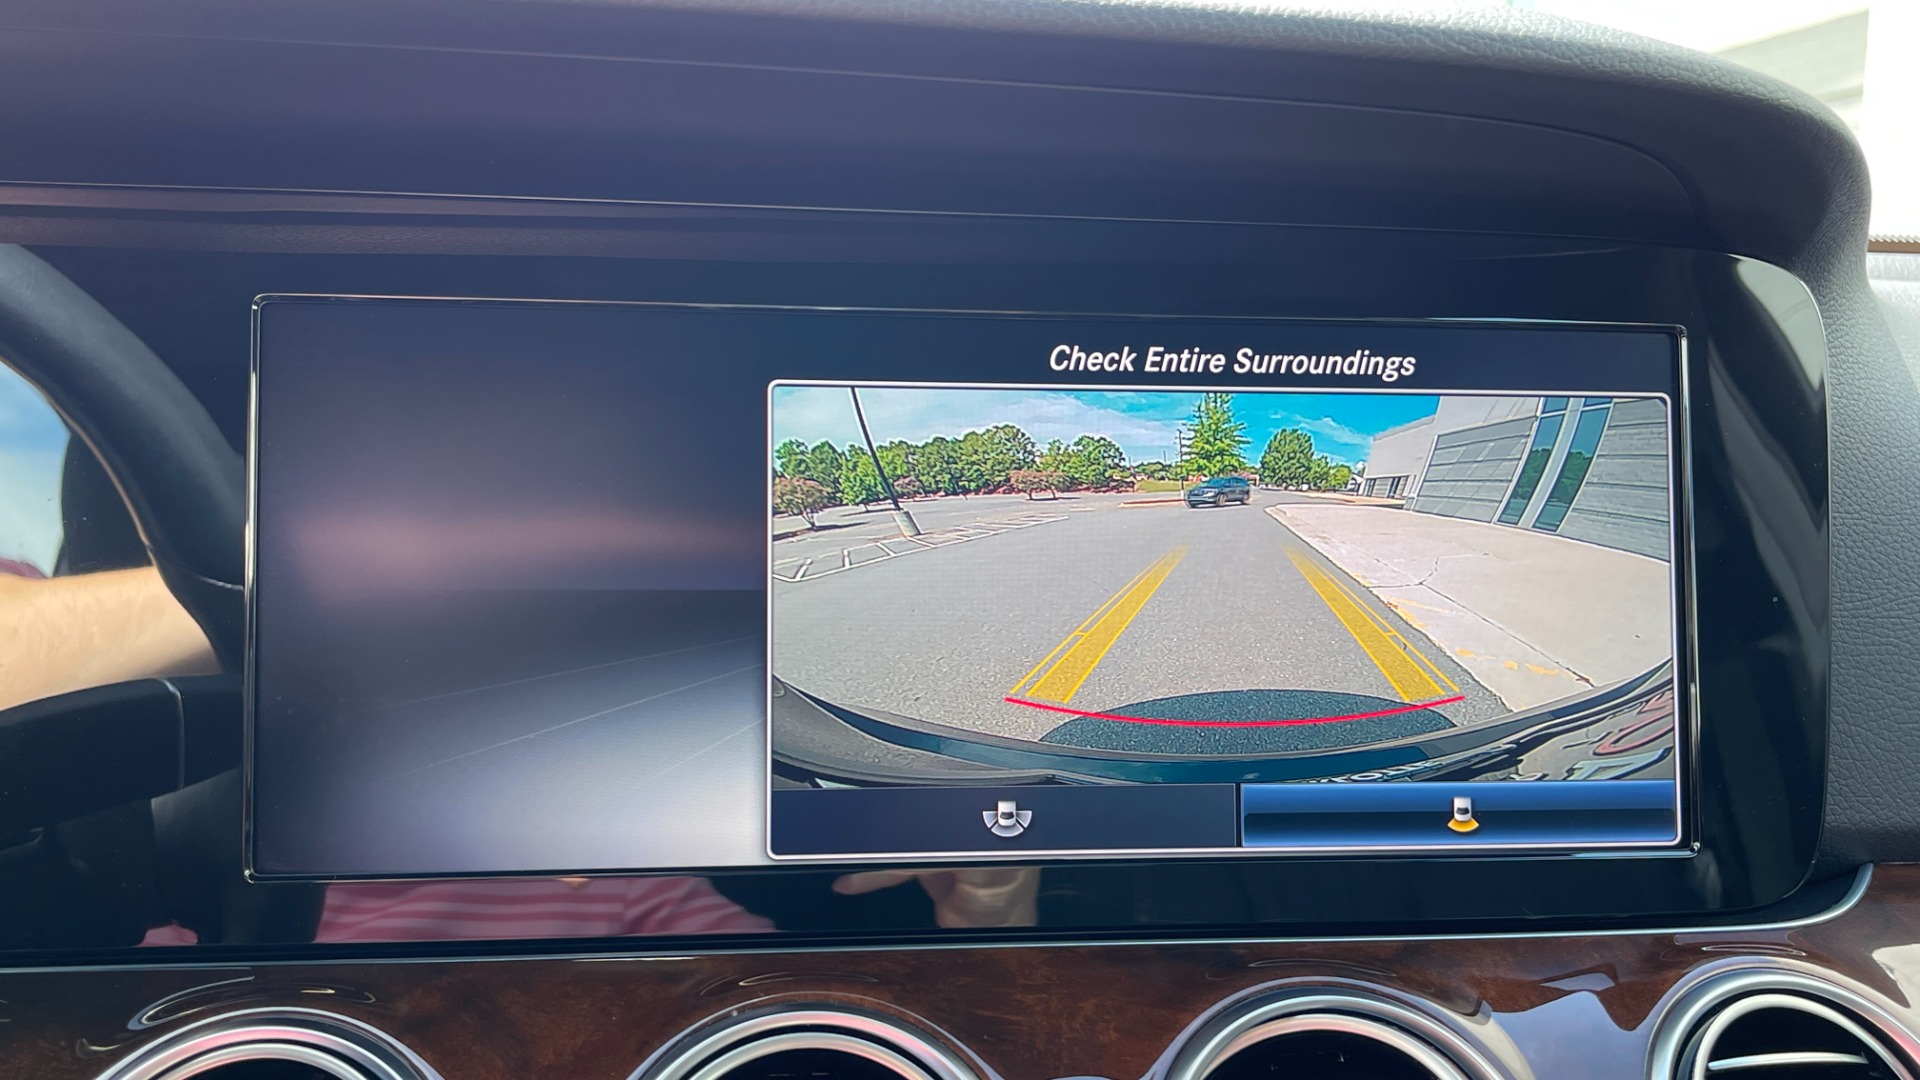 Used 2019 Mercedes-Benz E-Class E300 / 4MATIC / BURMESTER SOUND / PREMIUM PACKAGE / BLIND SPOT ASSIST for sale Sold at Formula Imports in Charlotte NC 28227 27